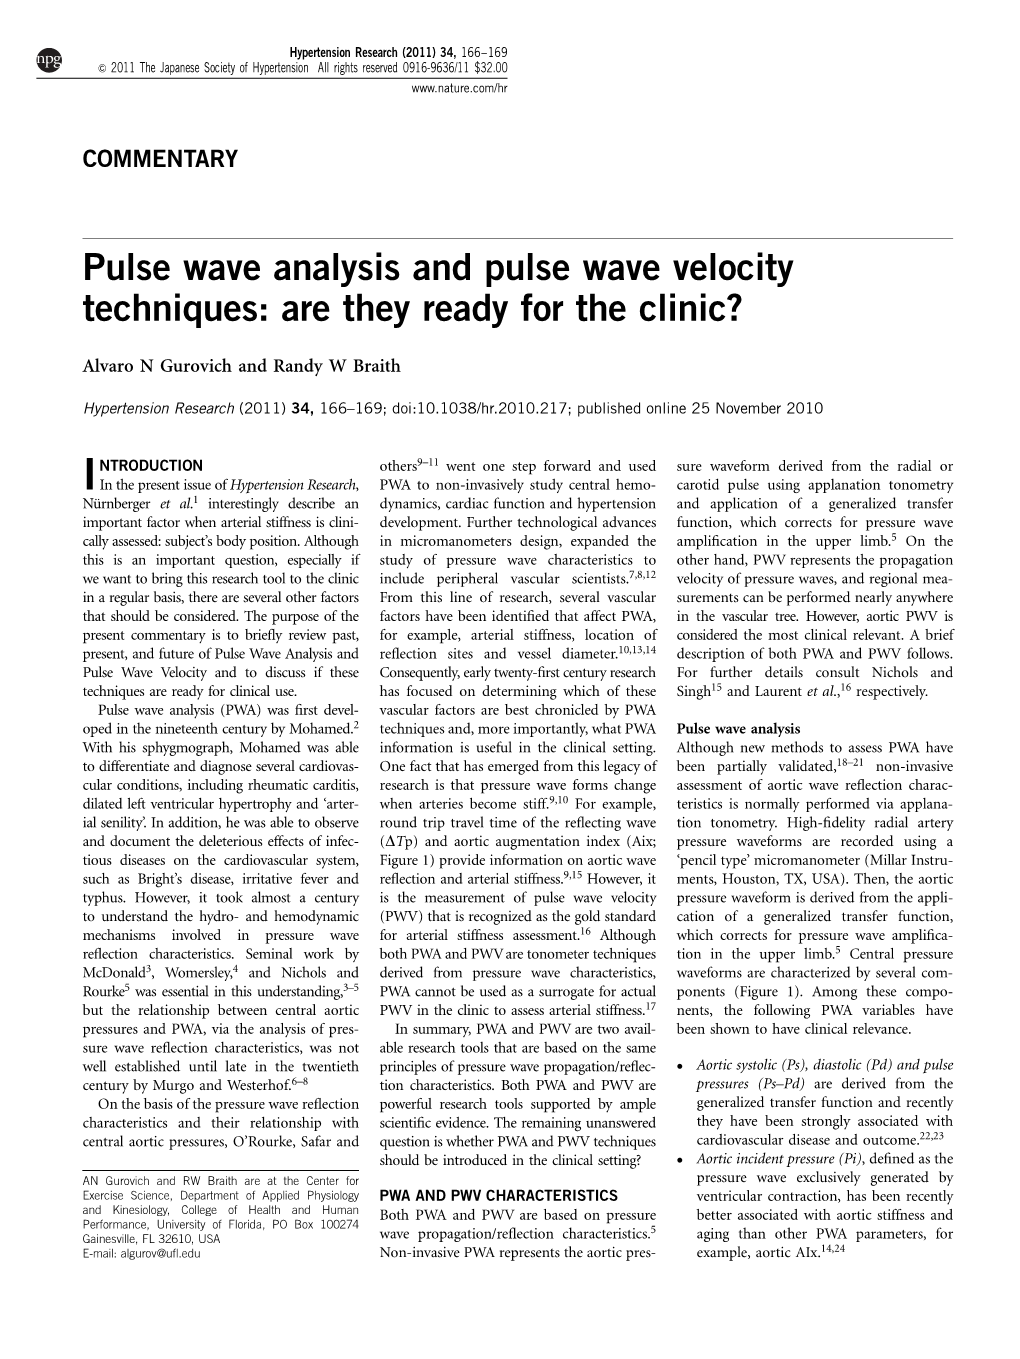 Pulse Wave Analysis and Pulse Wave Velocity Techniques